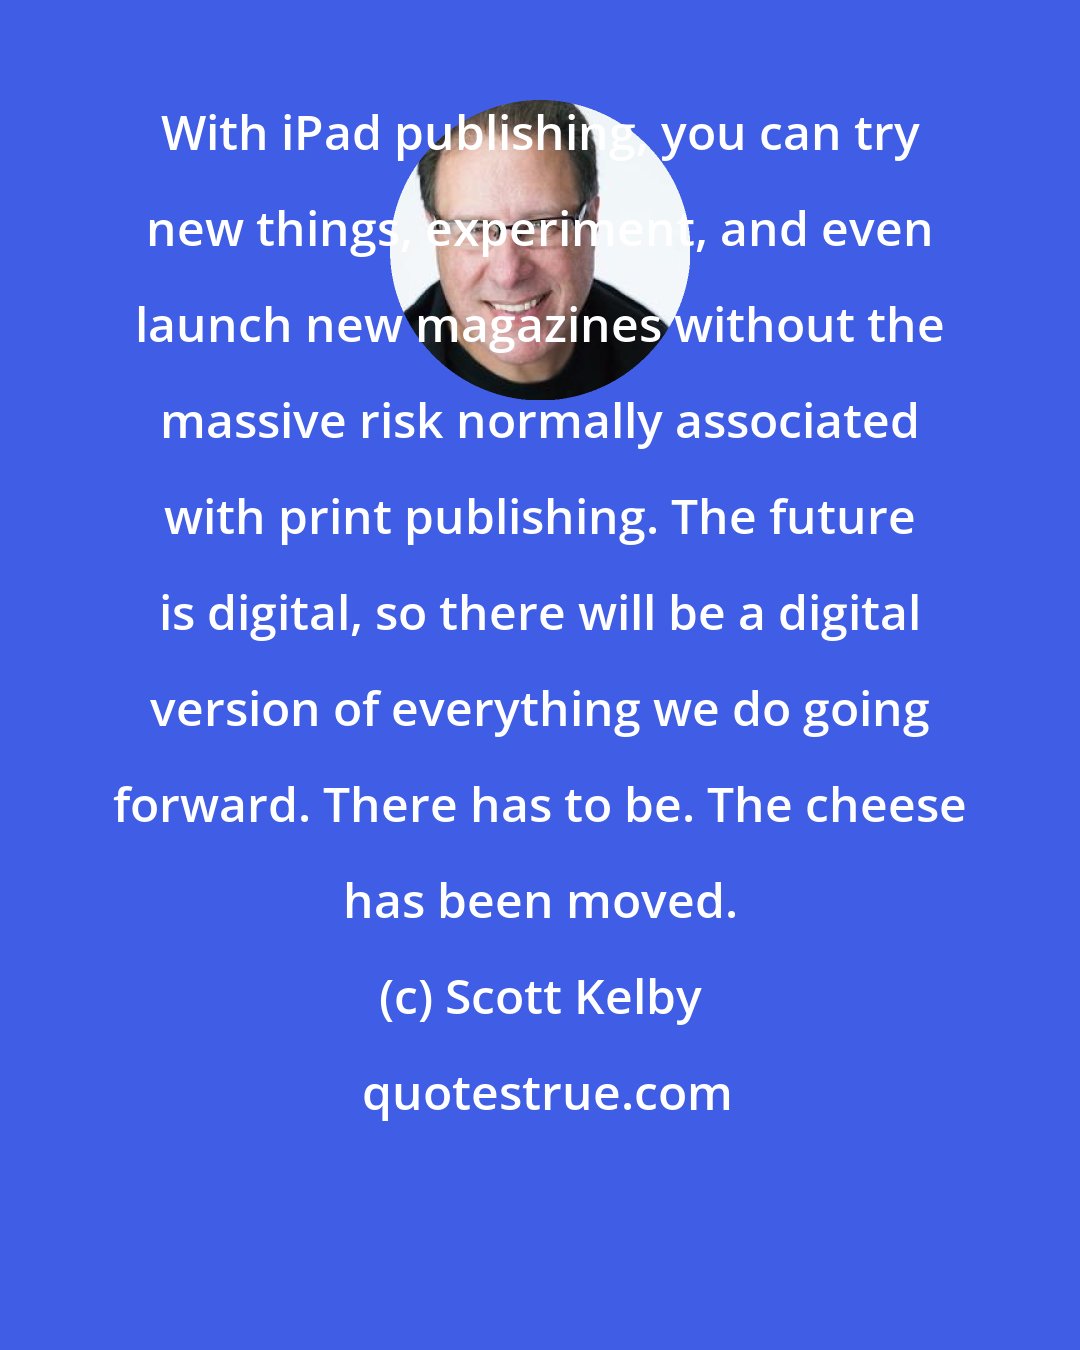 Scott Kelby: With iPad publishing, you can try new things, experiment, and even launch new magazines without the massive risk normally associated with print publishing. The future is digital, so there will be a digital version of everything we do going forward. There has to be. The cheese has been moved.